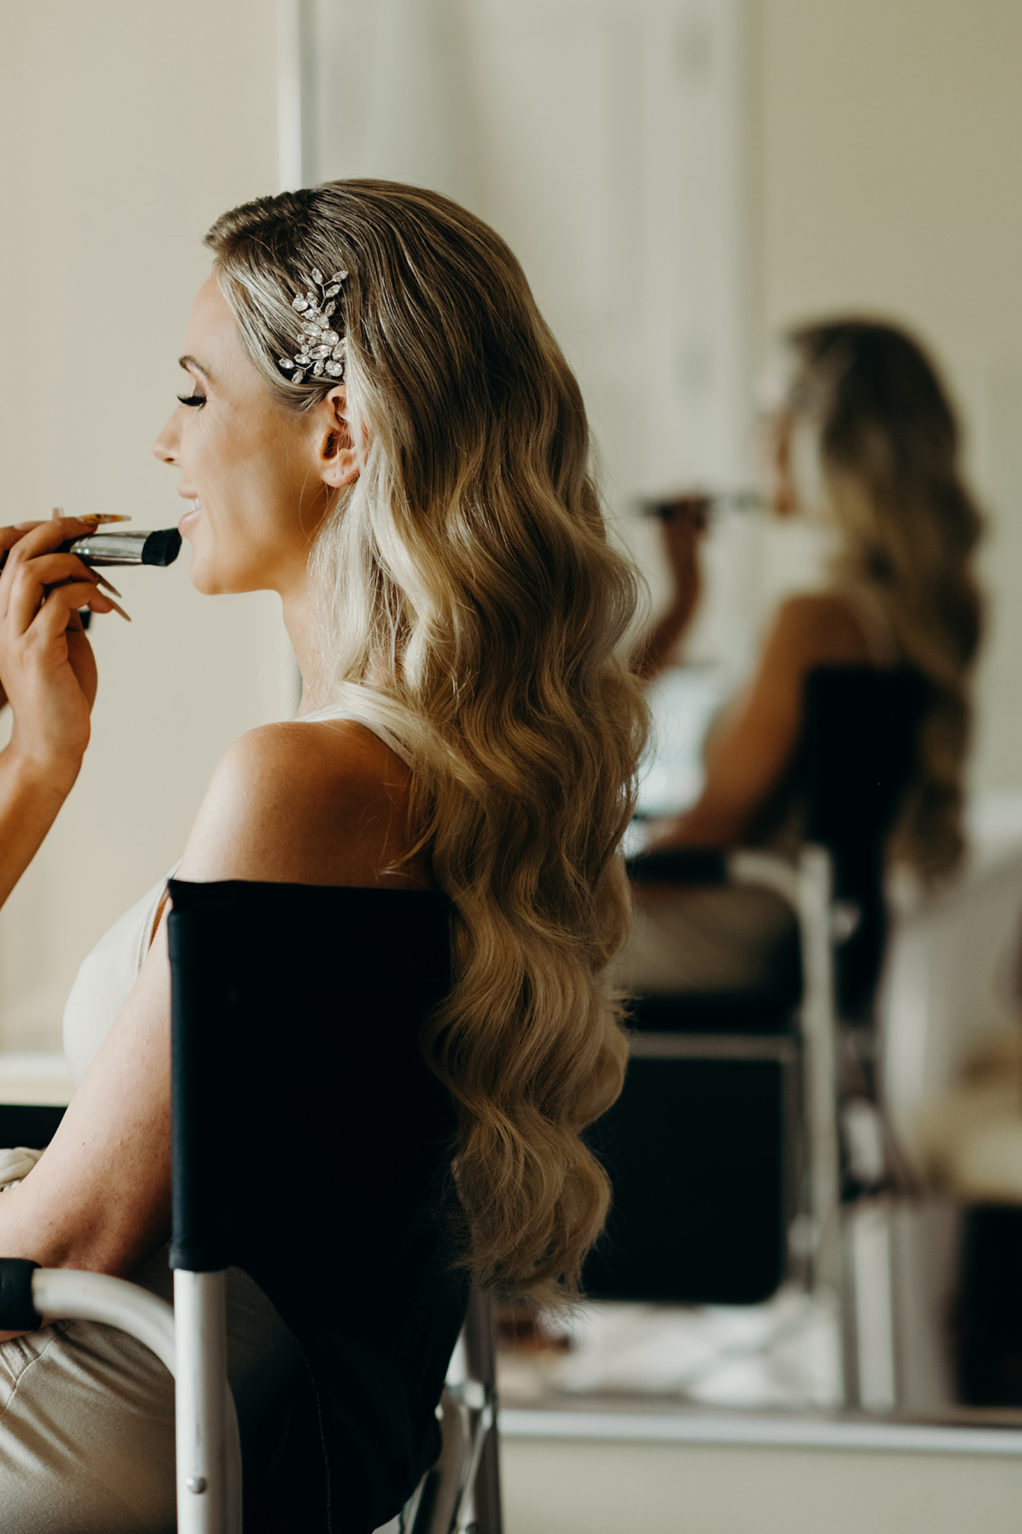 Tampa Bay Bride Getting Wedding Hair and Makeup Done, Loose Waves with Rhinestone Clip